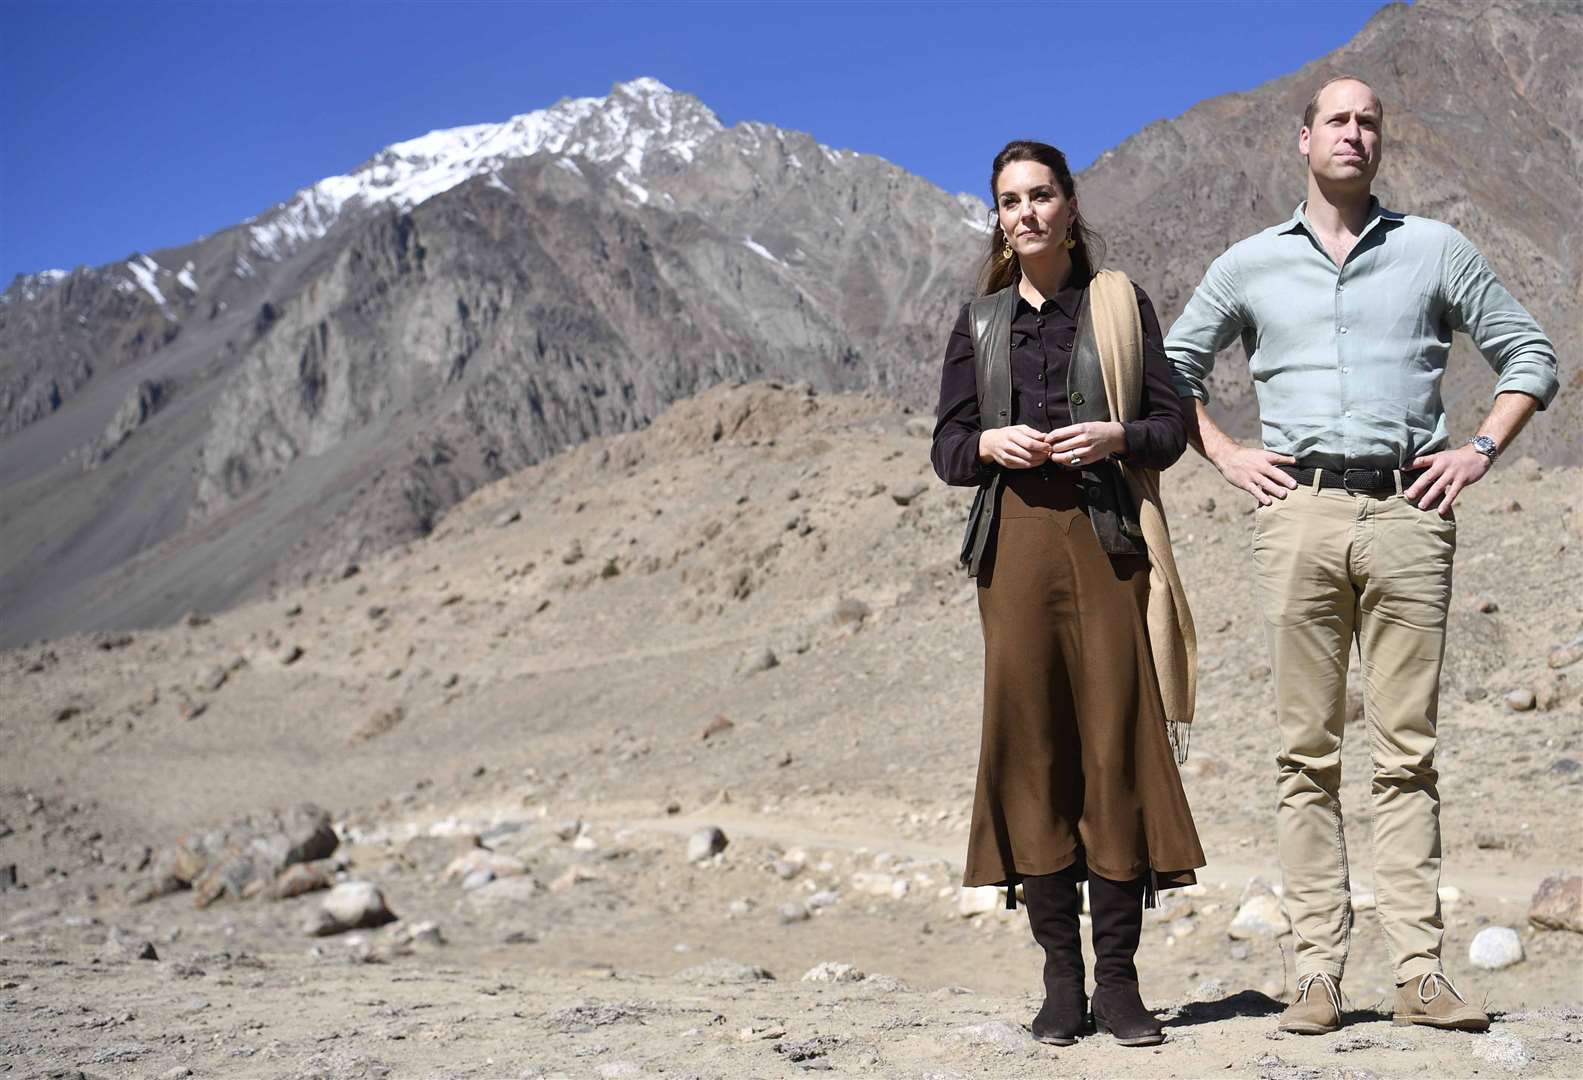 William and Kate learned about the effects of climate change while visiting the Chiatibo glacier in the Hindu Kush mountain range (Neil Hall/PA)